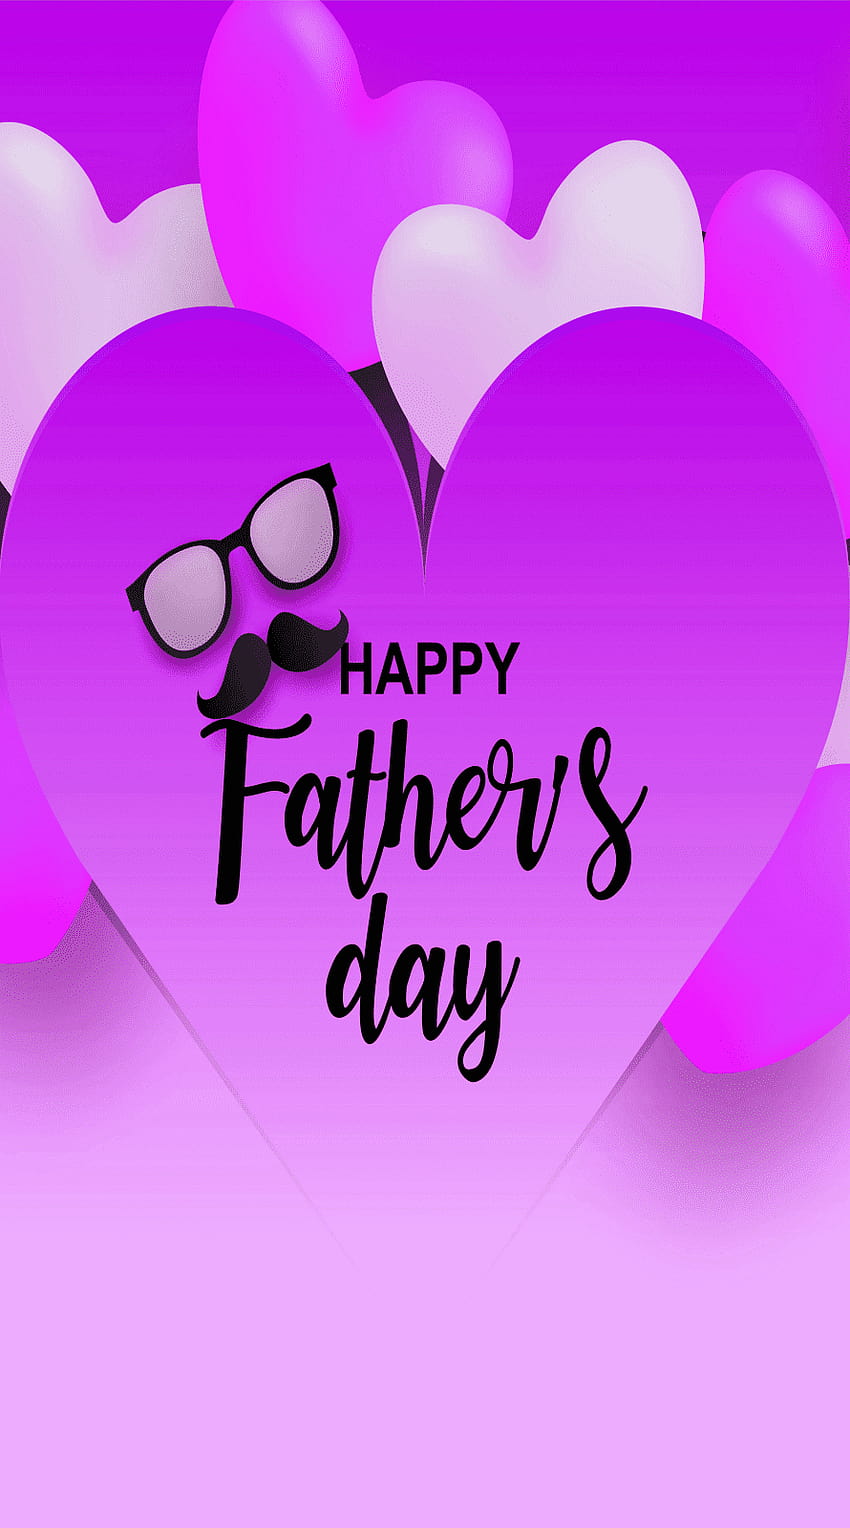 Super cute Happy fathers day wishes backgrounds dia del padre ...